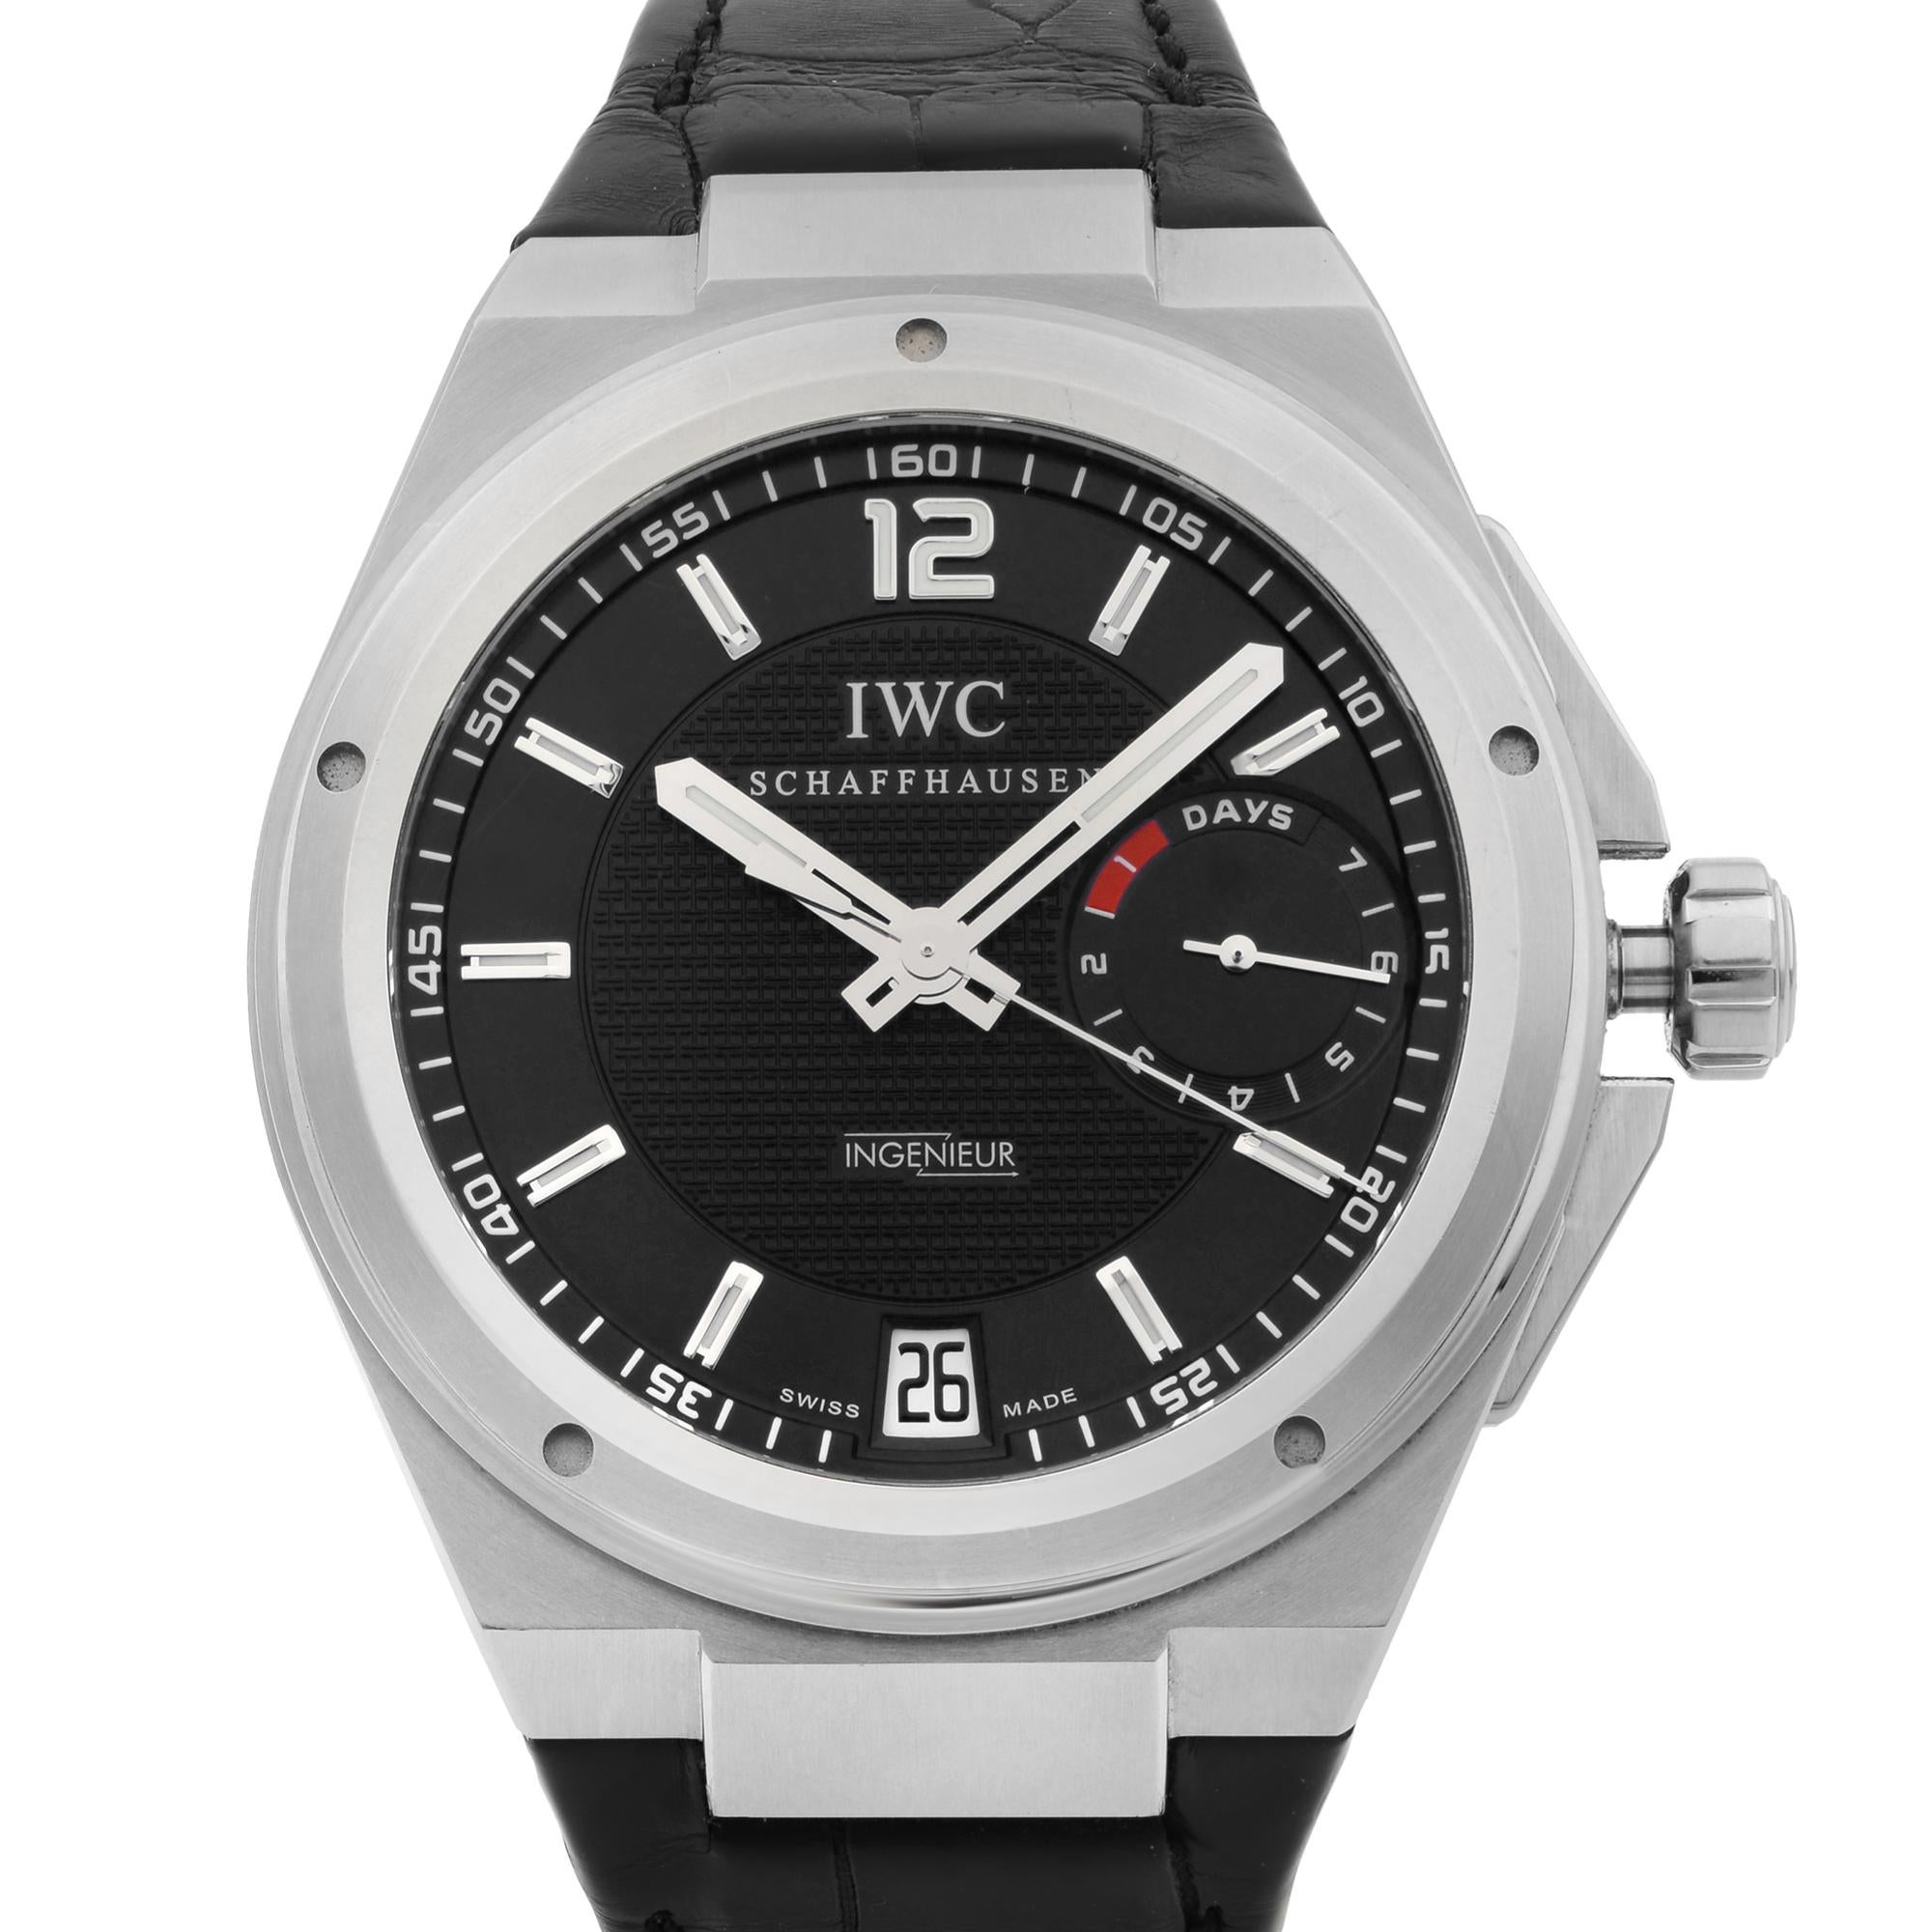 This pre-owned IWC Ingenieur  IW500501 is a beautiful men's timepiece that is powered by mechanical (automatic) movement which is cased in a stainless steel case. It has a round shape face, date indicator, power reserve indicator dial and has hand